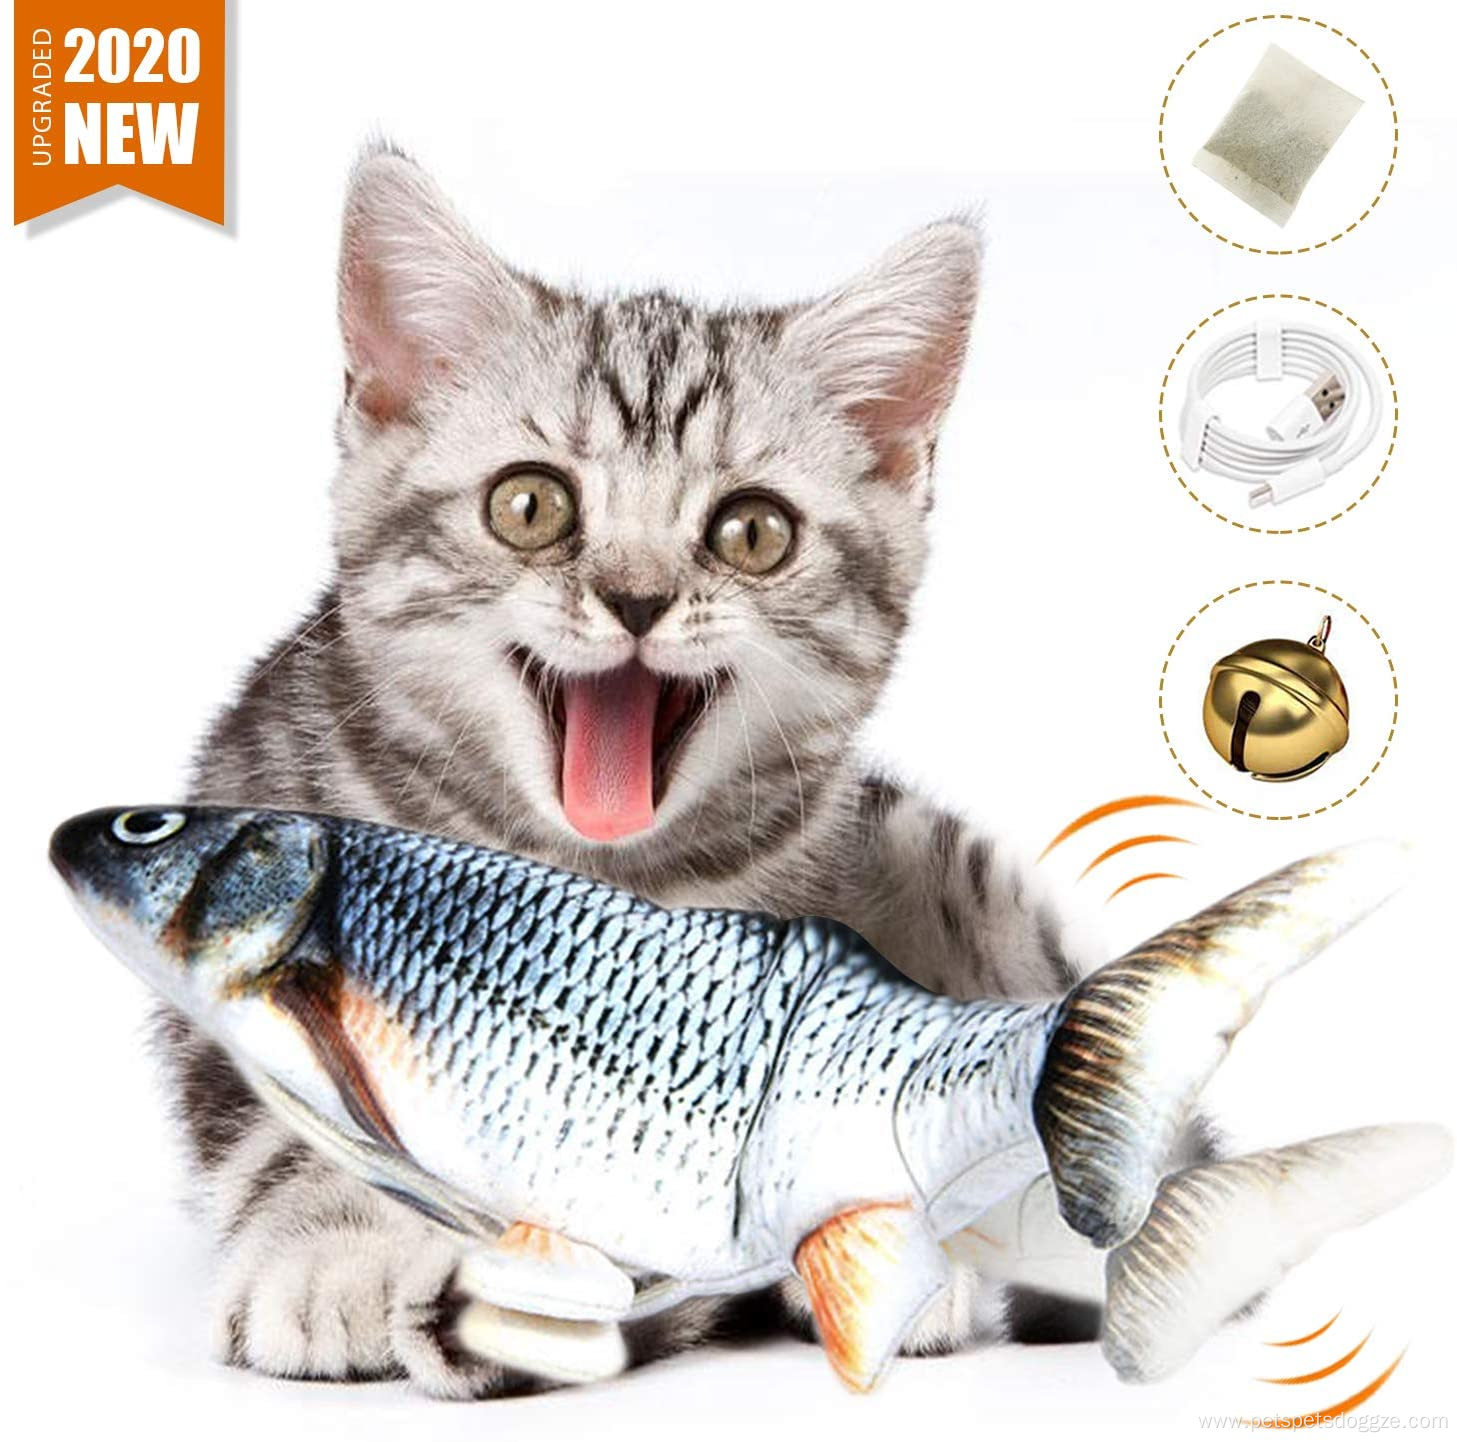 Fish toy for cat electric cat fish toy